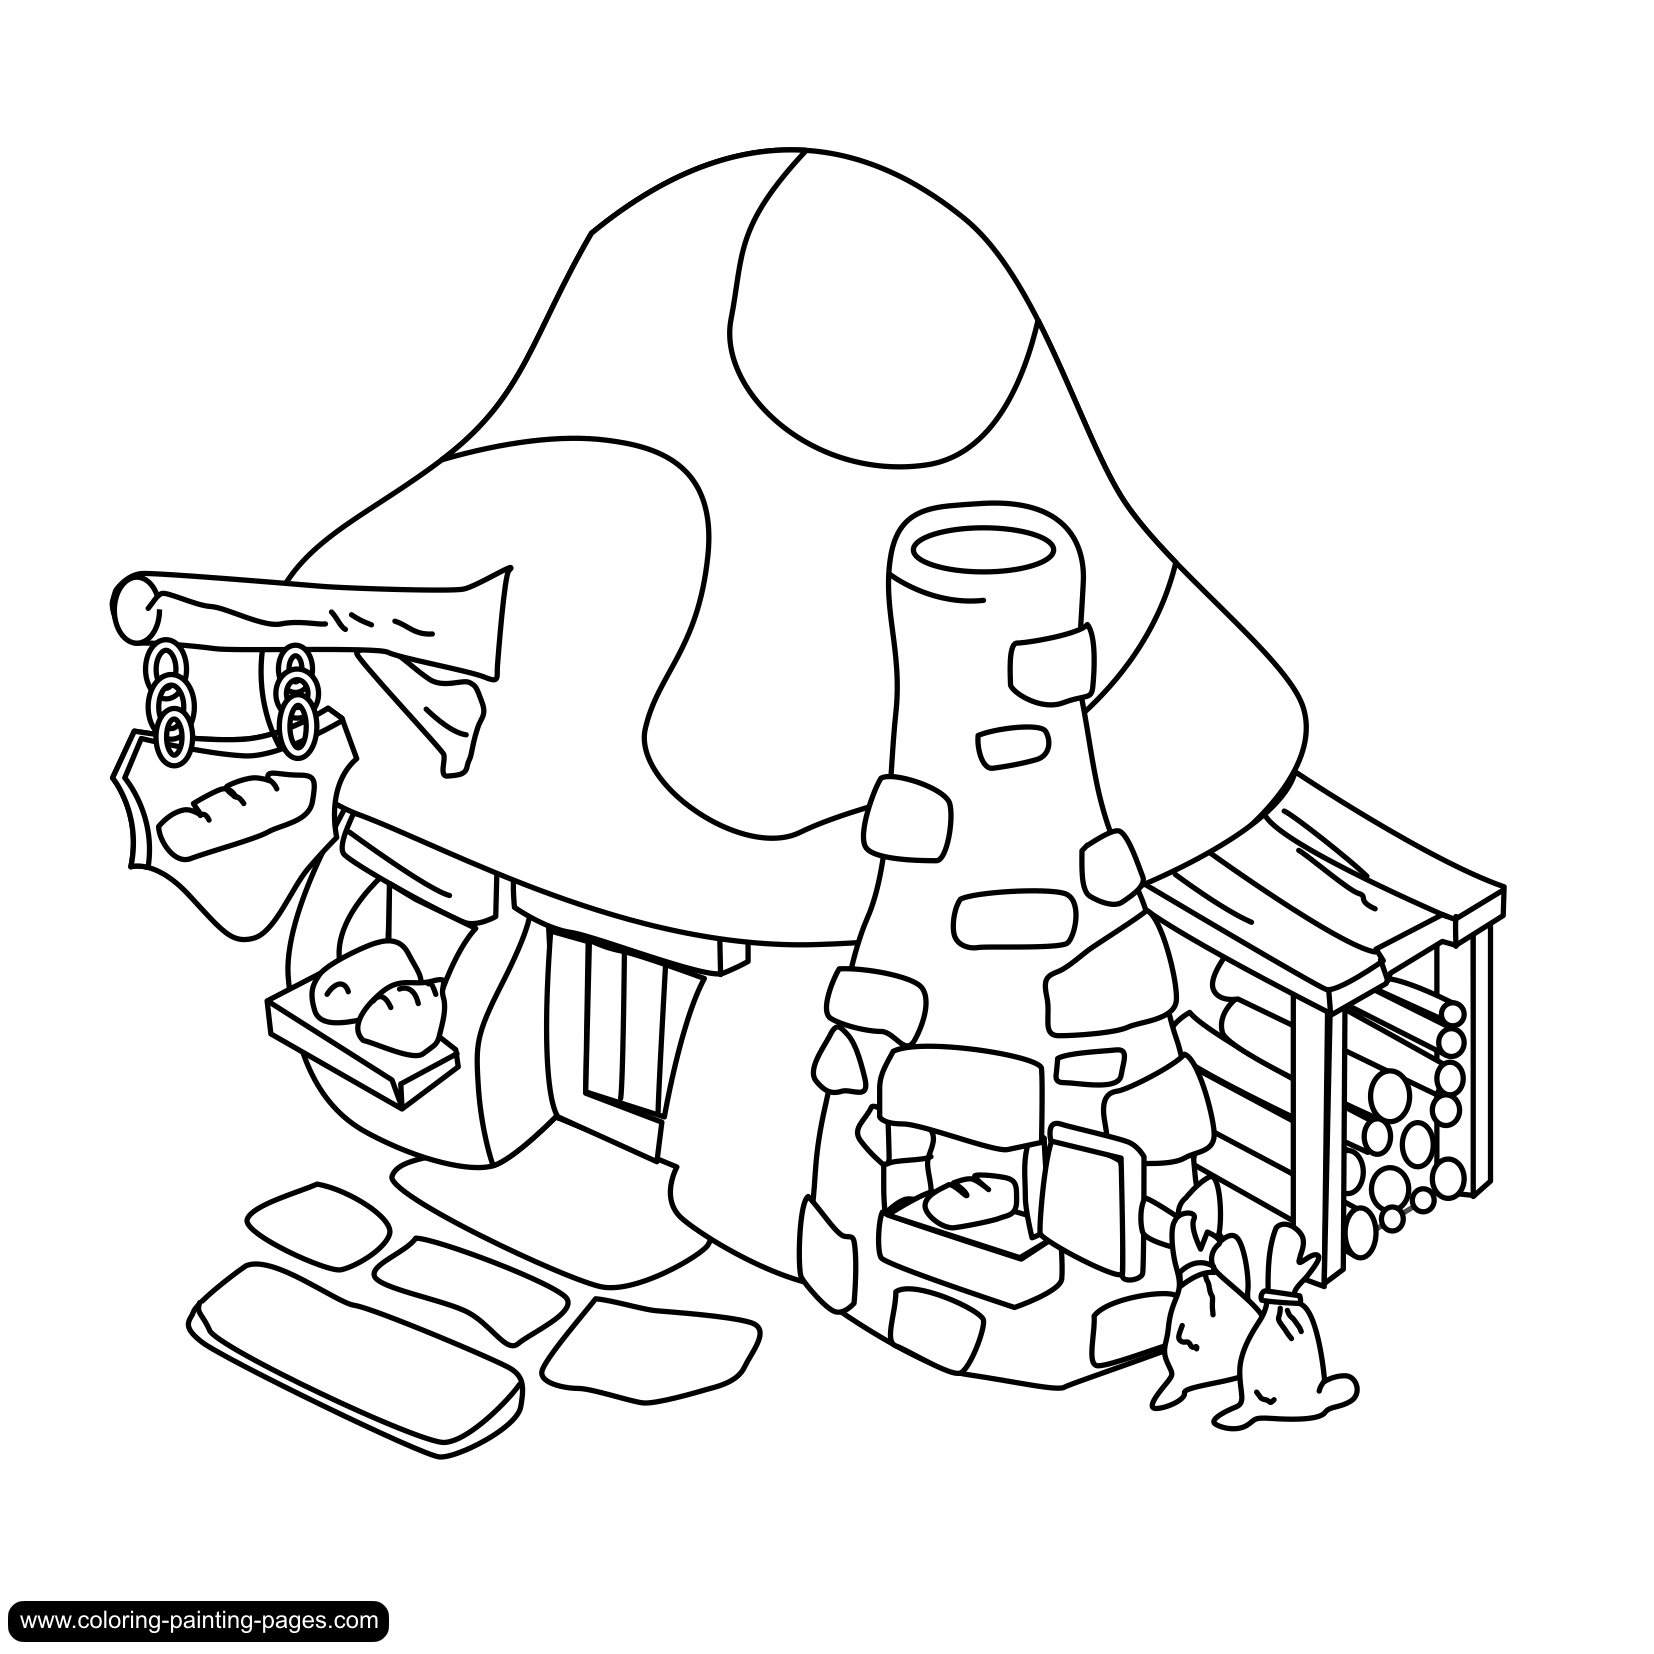 Coloring pages smurfs - free downloads